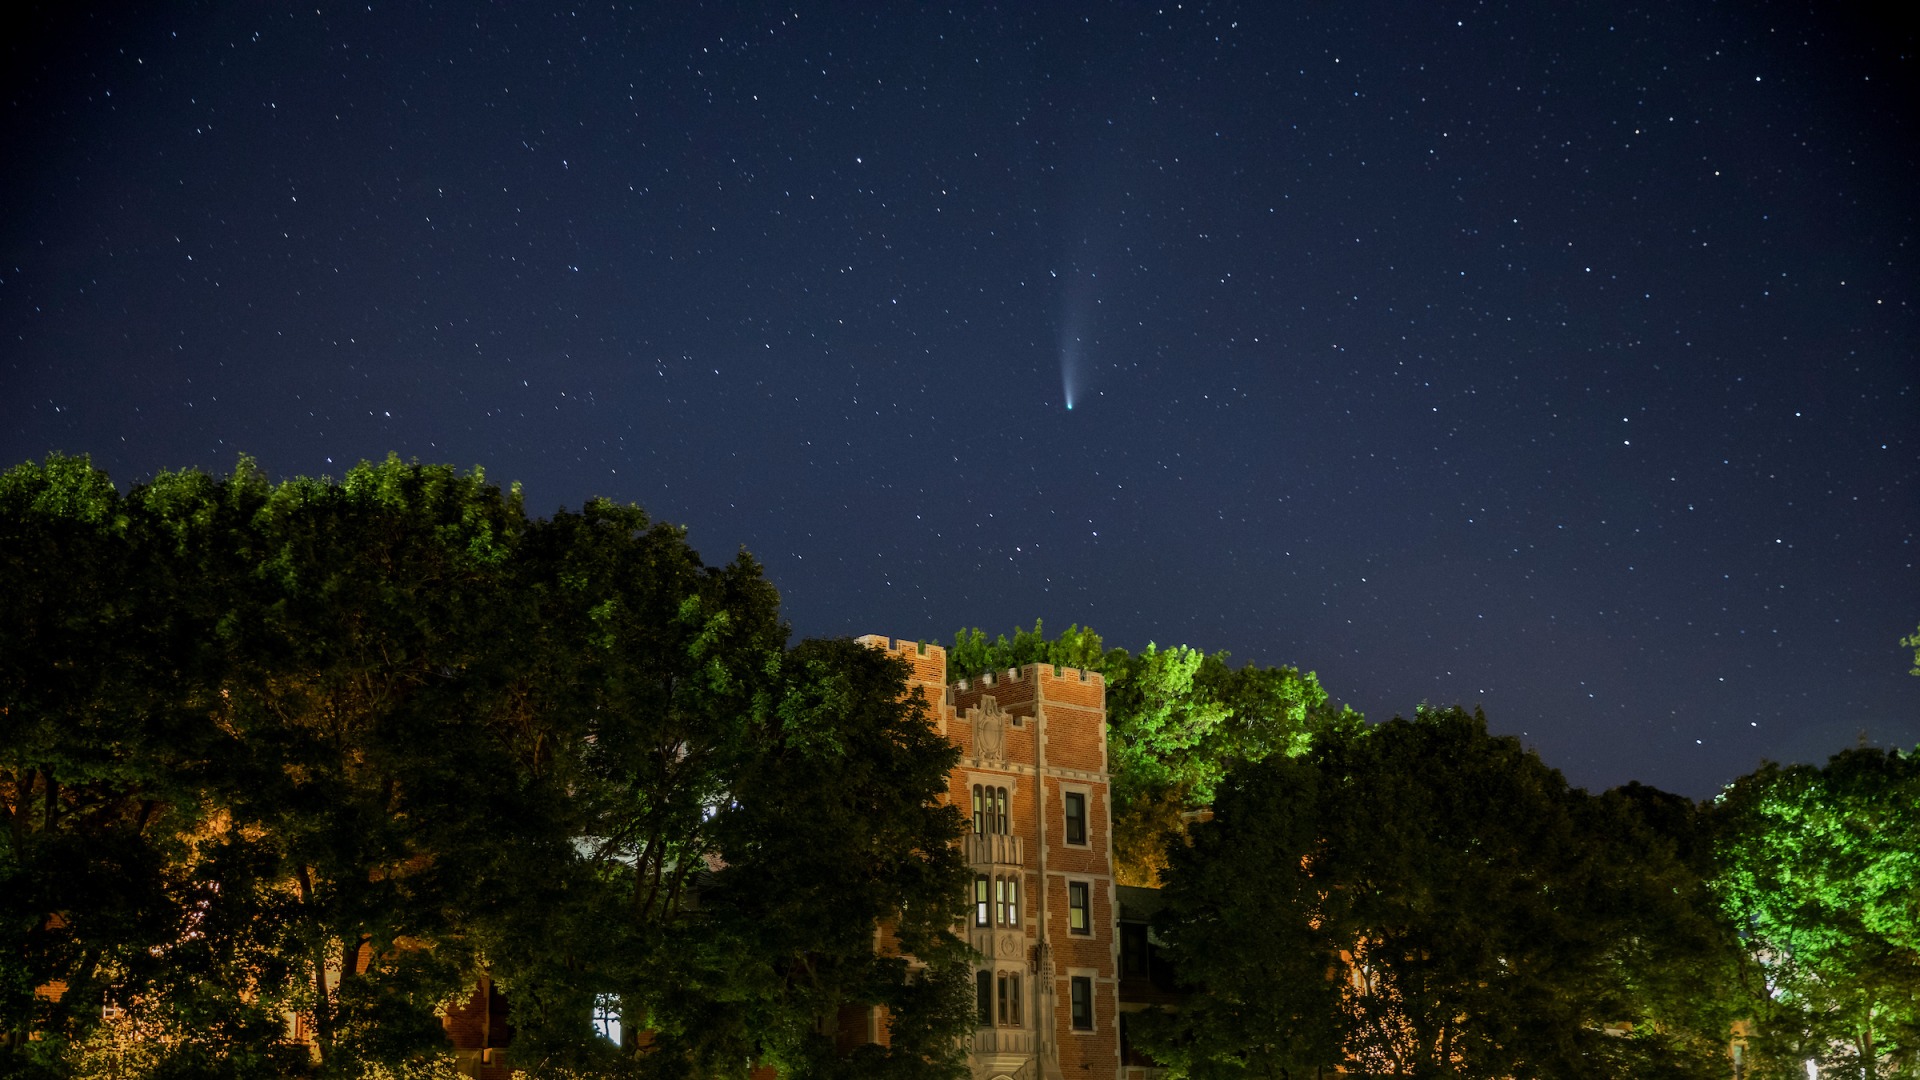 North campus with comet descending in the night sky